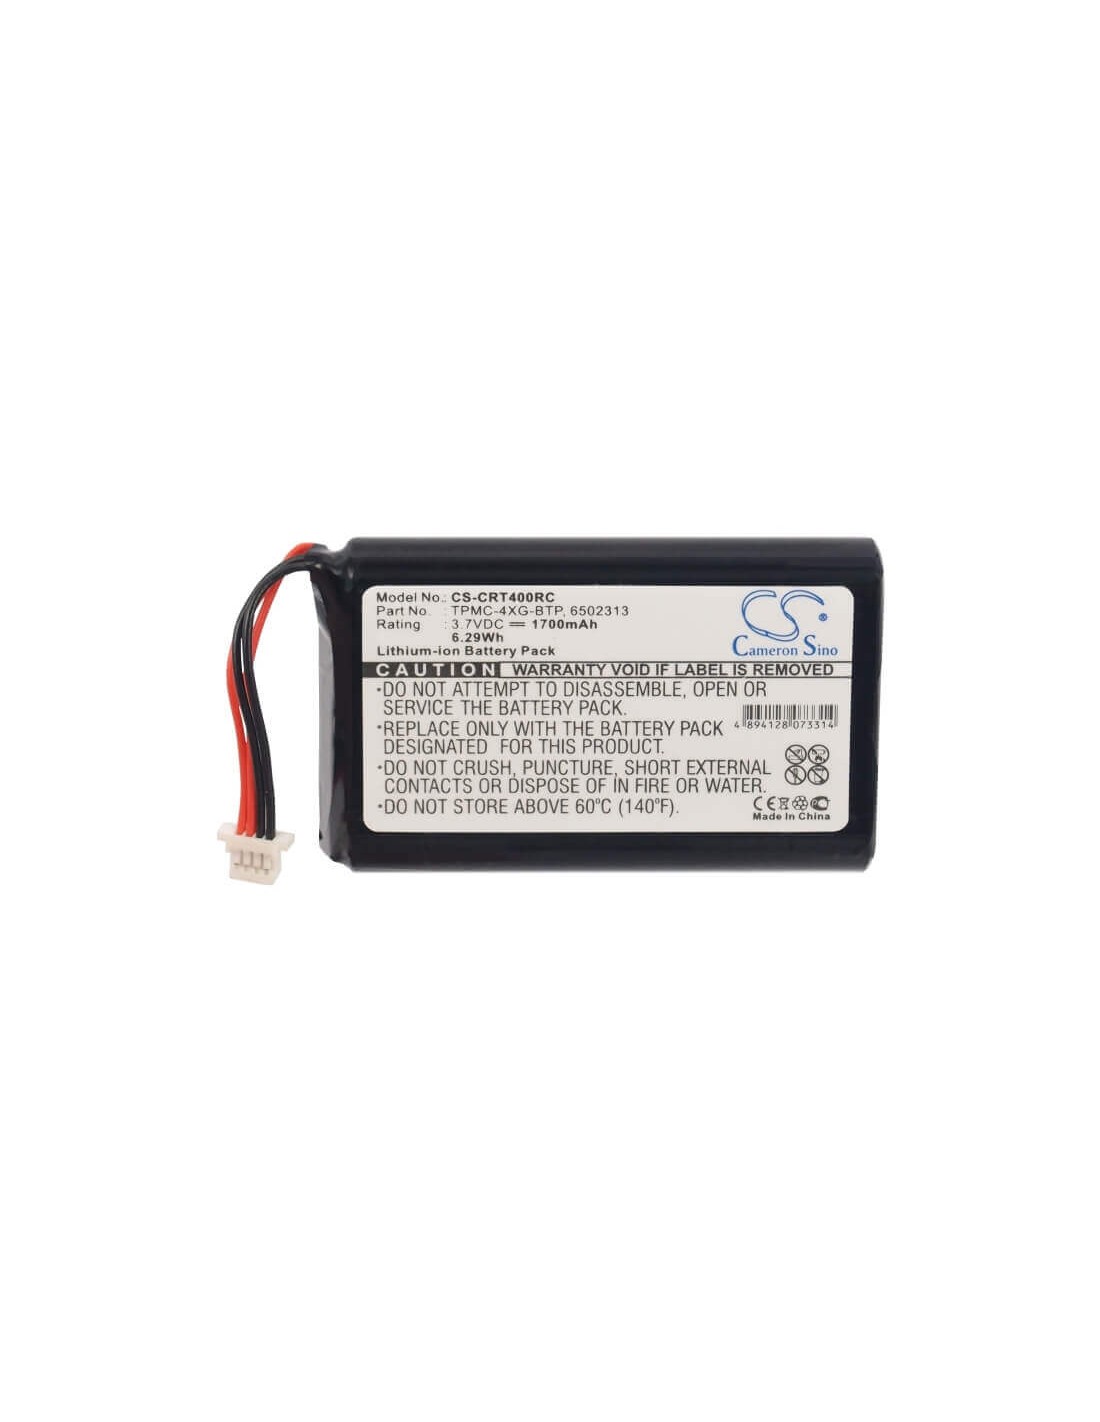 Battery for Crestron Tpmc-4xg, Tpmc-4xg Touchpanel, A0356 3.7V, 1700mAh - 6.29Wh